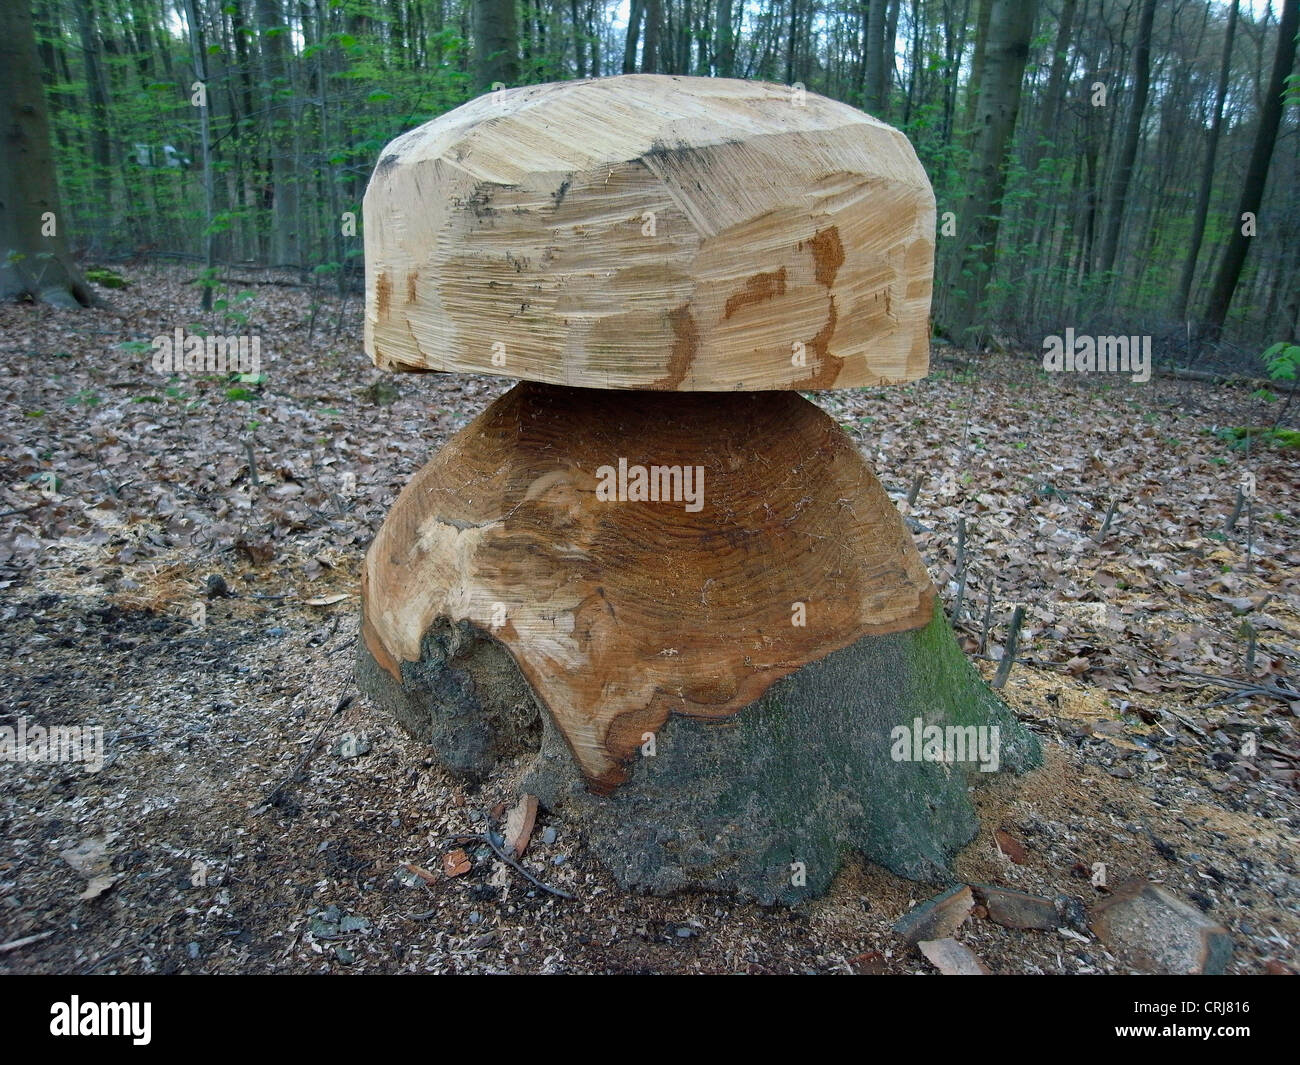 mushroom carved from a tree stub still rooted in the forest ground Stock Photo